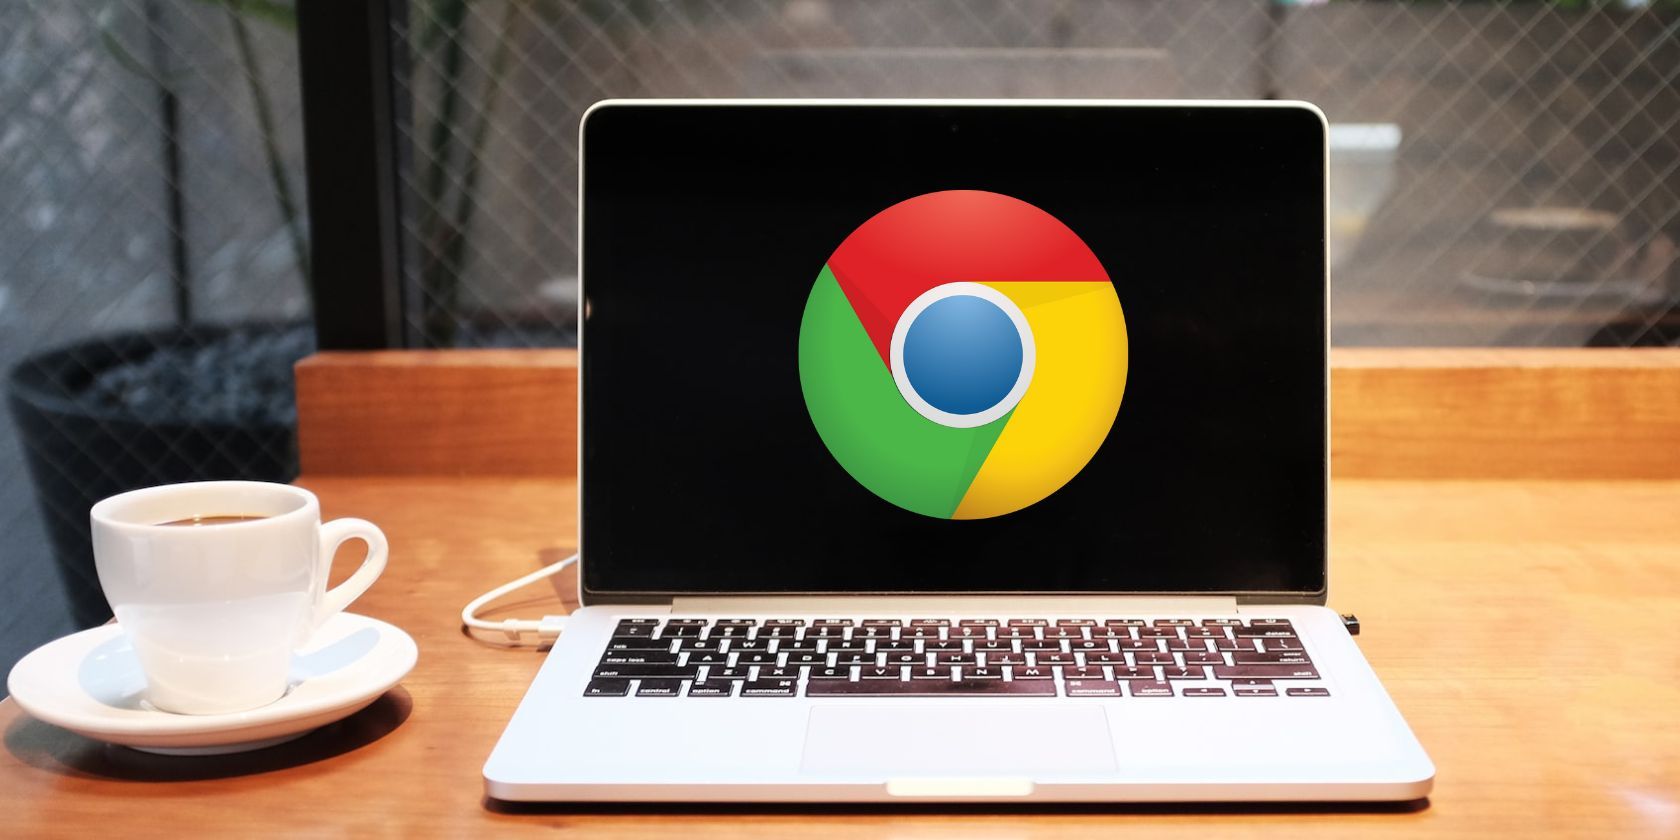 A silver laptop with the Google Chrome logo on the screen